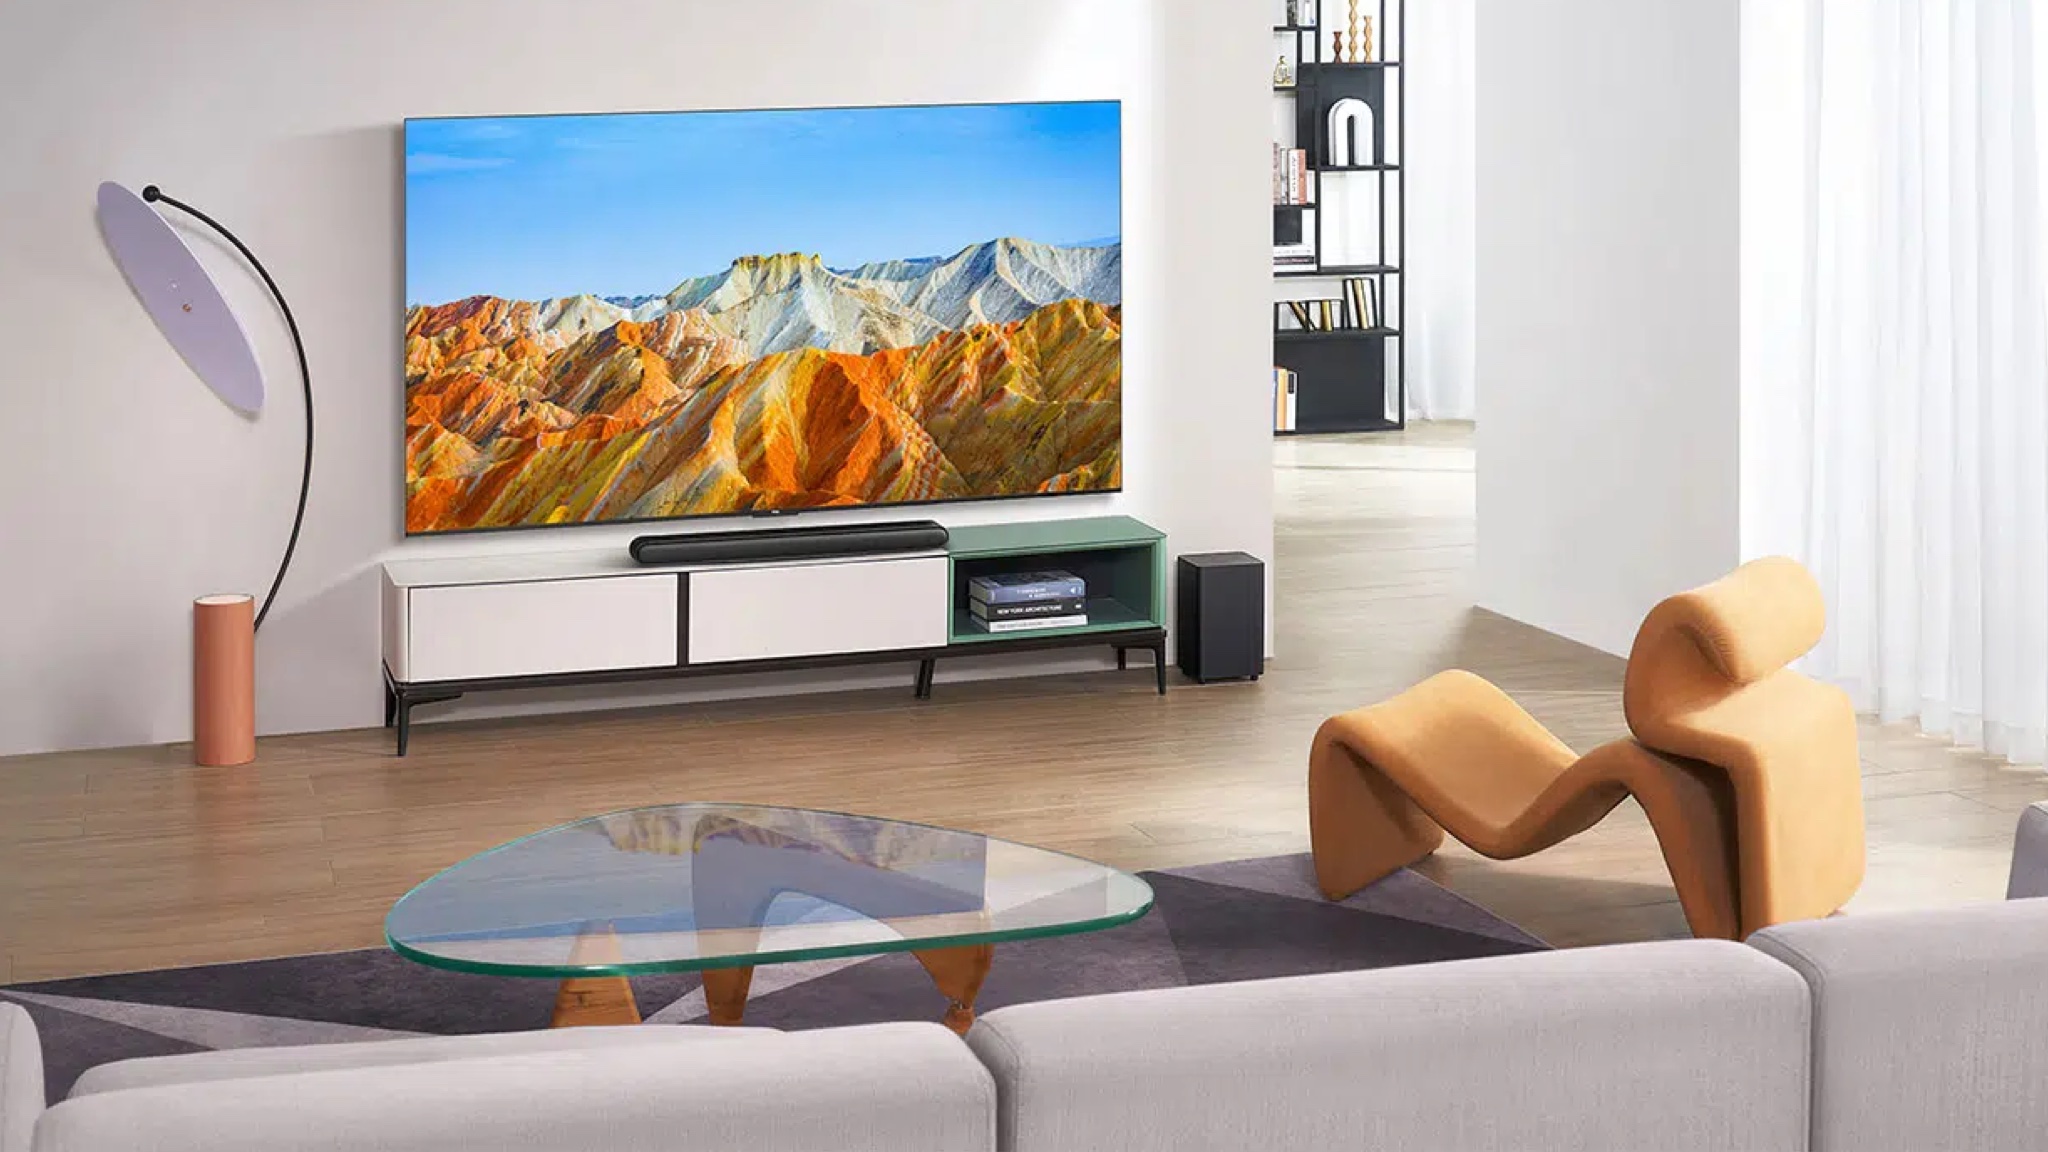 Meet Samsung's Newest Giant TV: The Affordable 98-Inch Screen Everyone’s Talking About